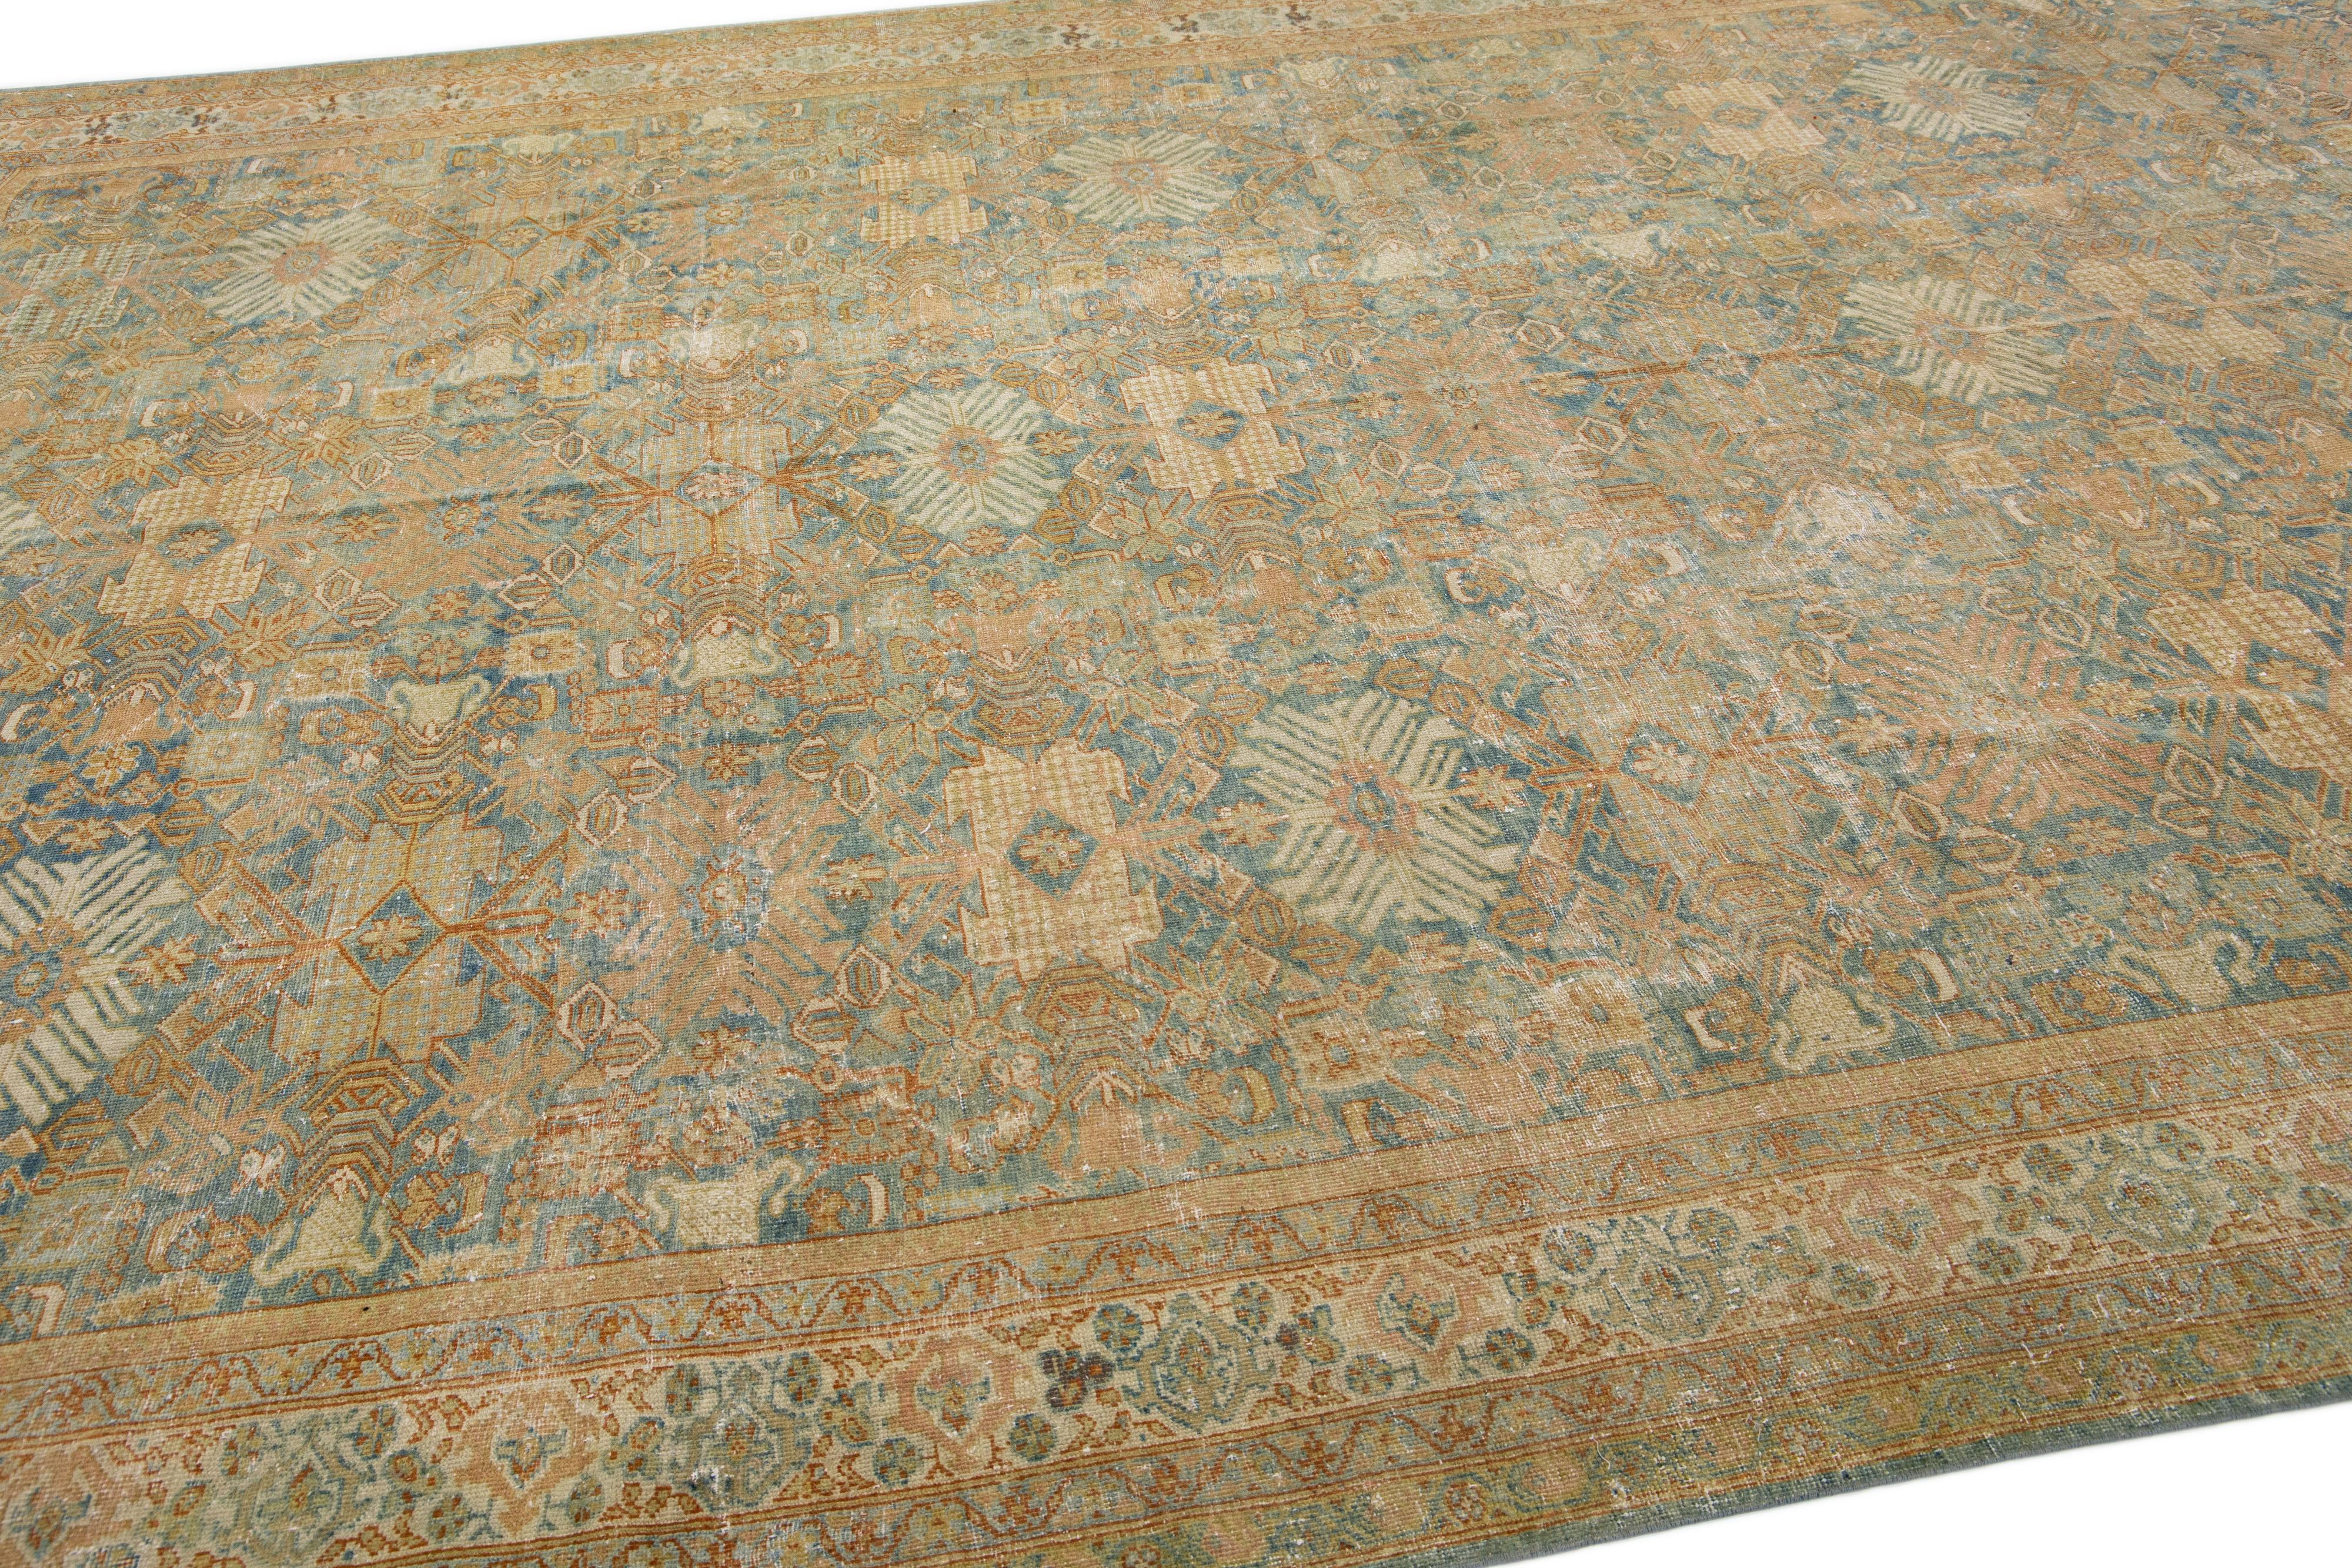 Antique Persian Mahal Orange & Blue Handmade Wool Rug with Floral Design In Good Condition For Sale In Norwalk, CT